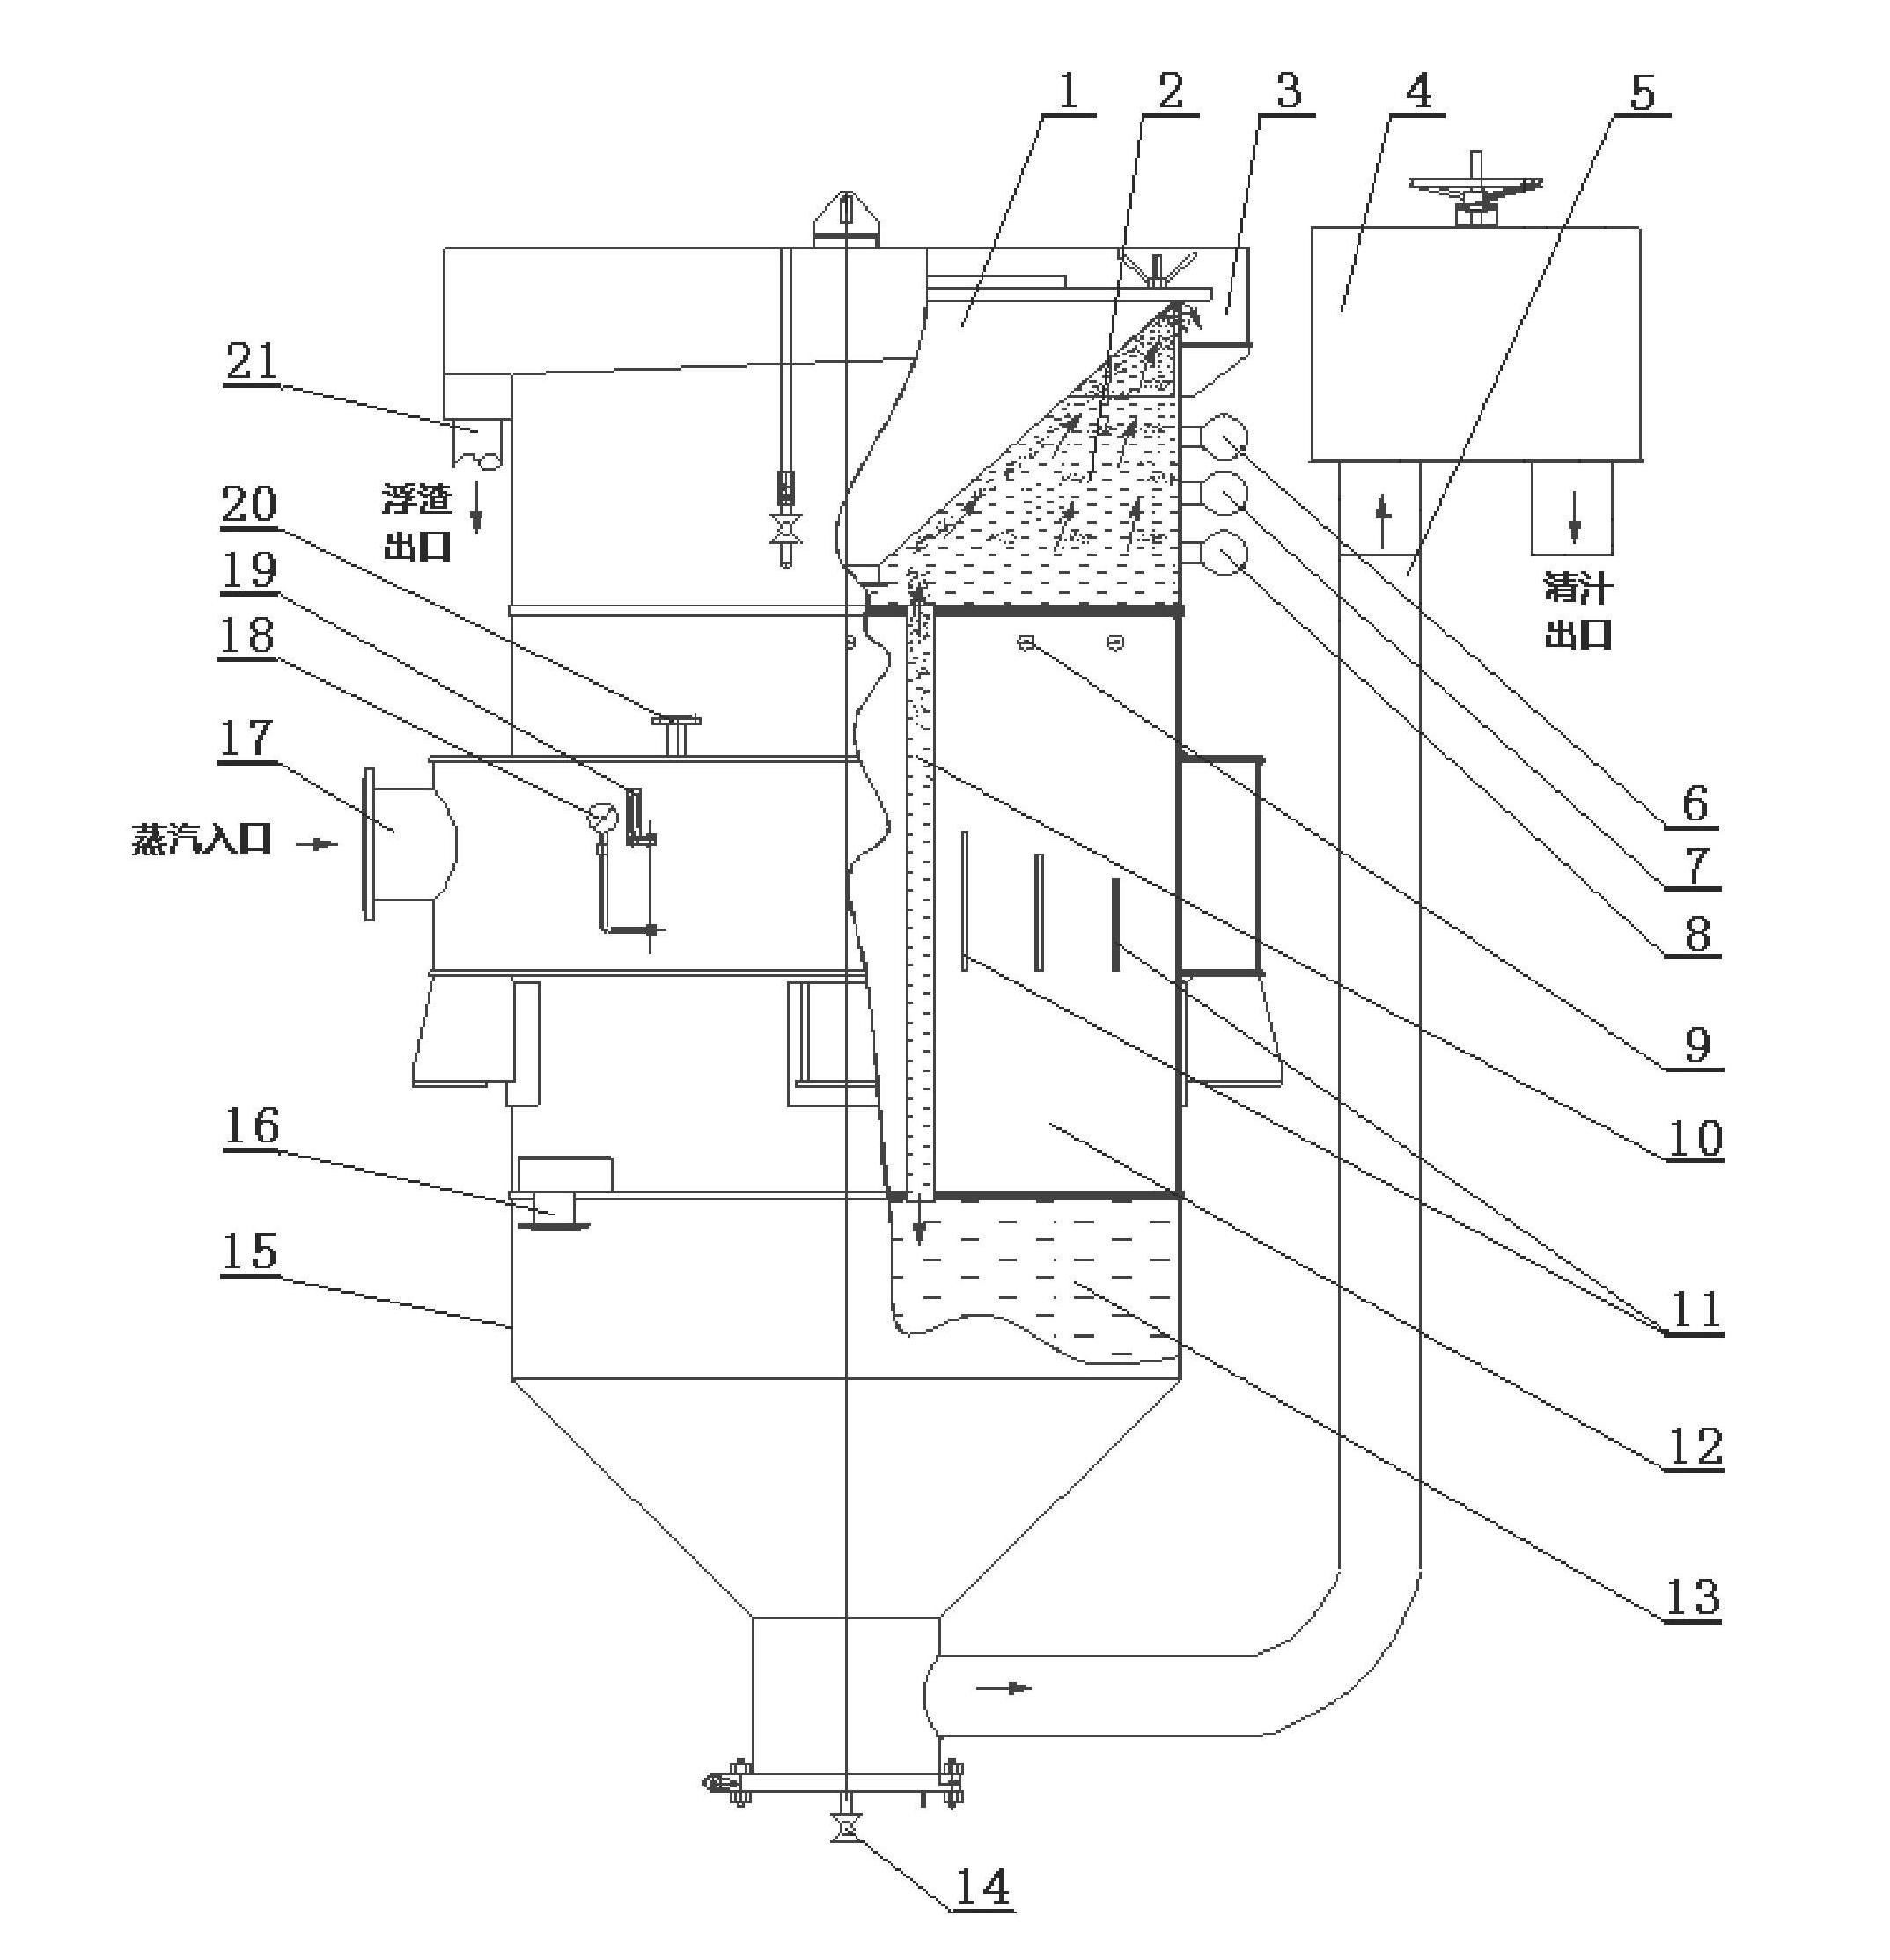 Method and equipment for clarifying cane juice by combining air floatation purification and thermal floatation purification